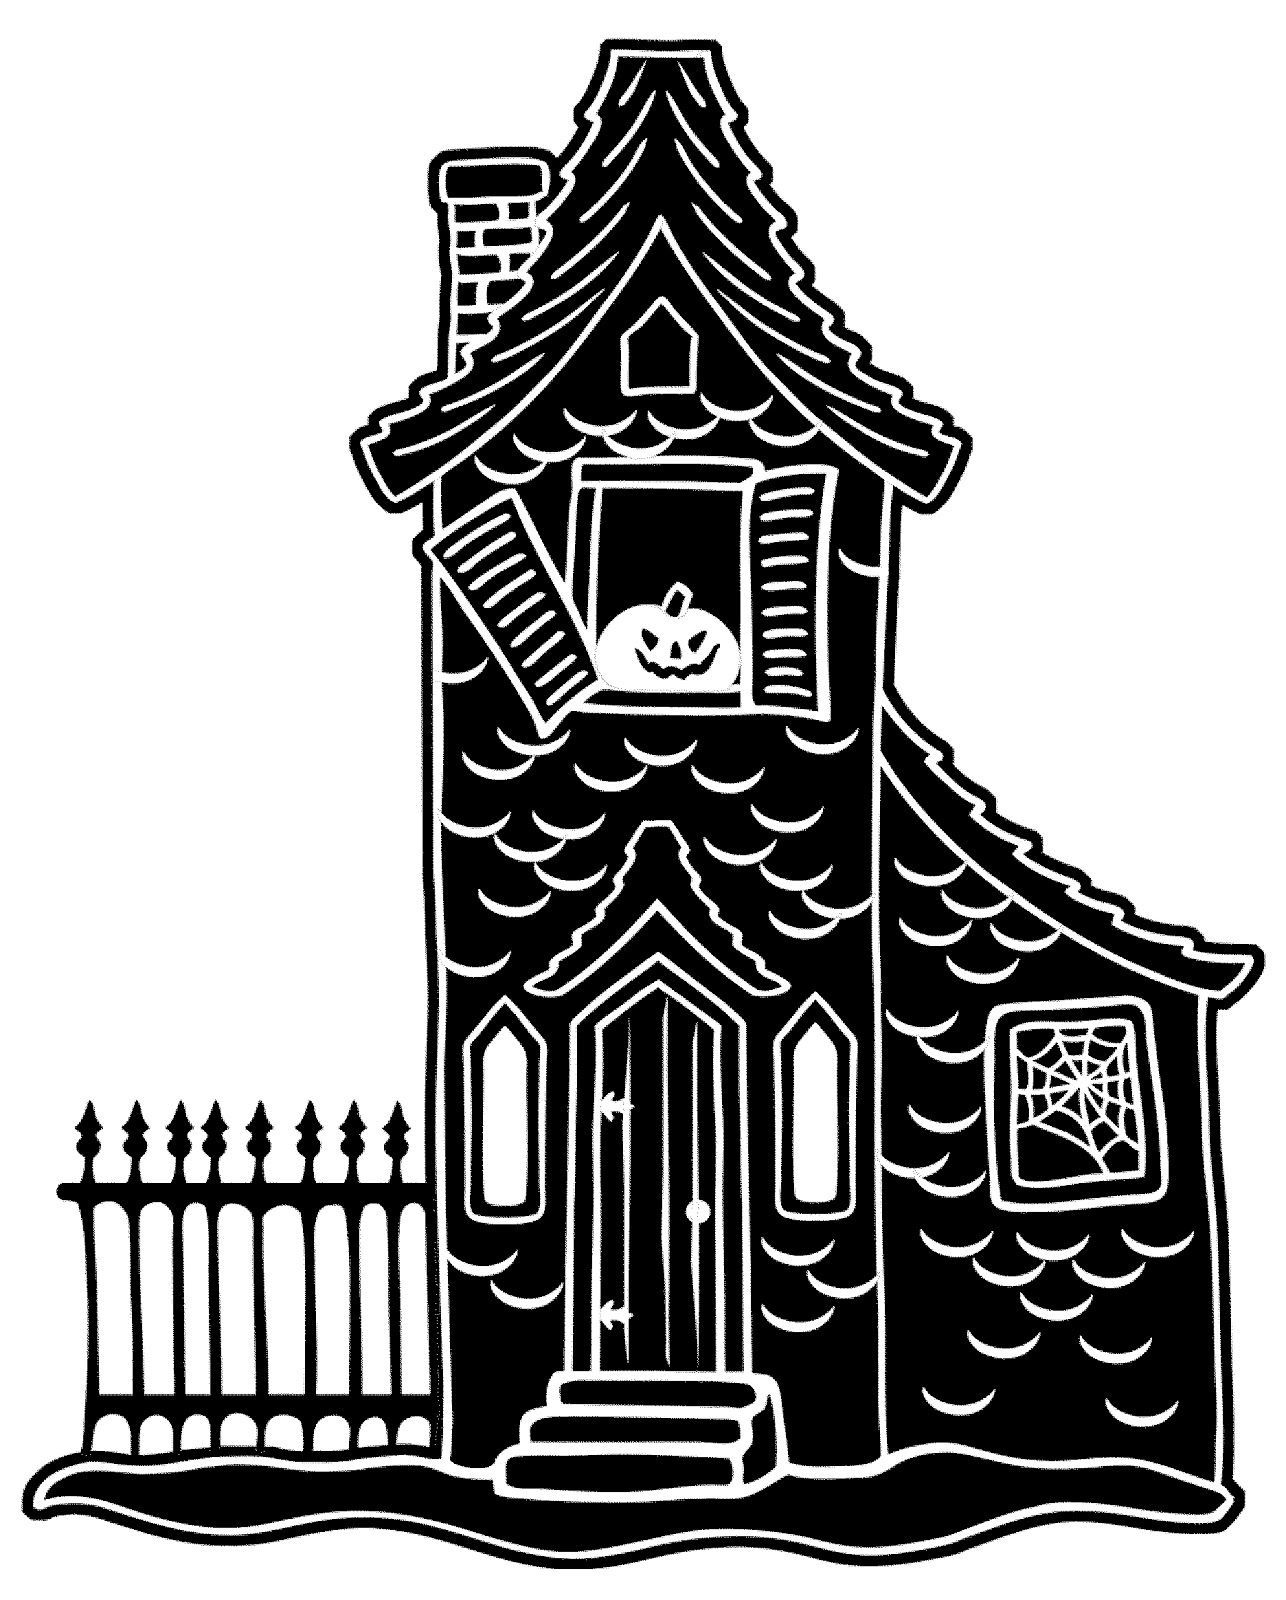 Haunted house clipart black